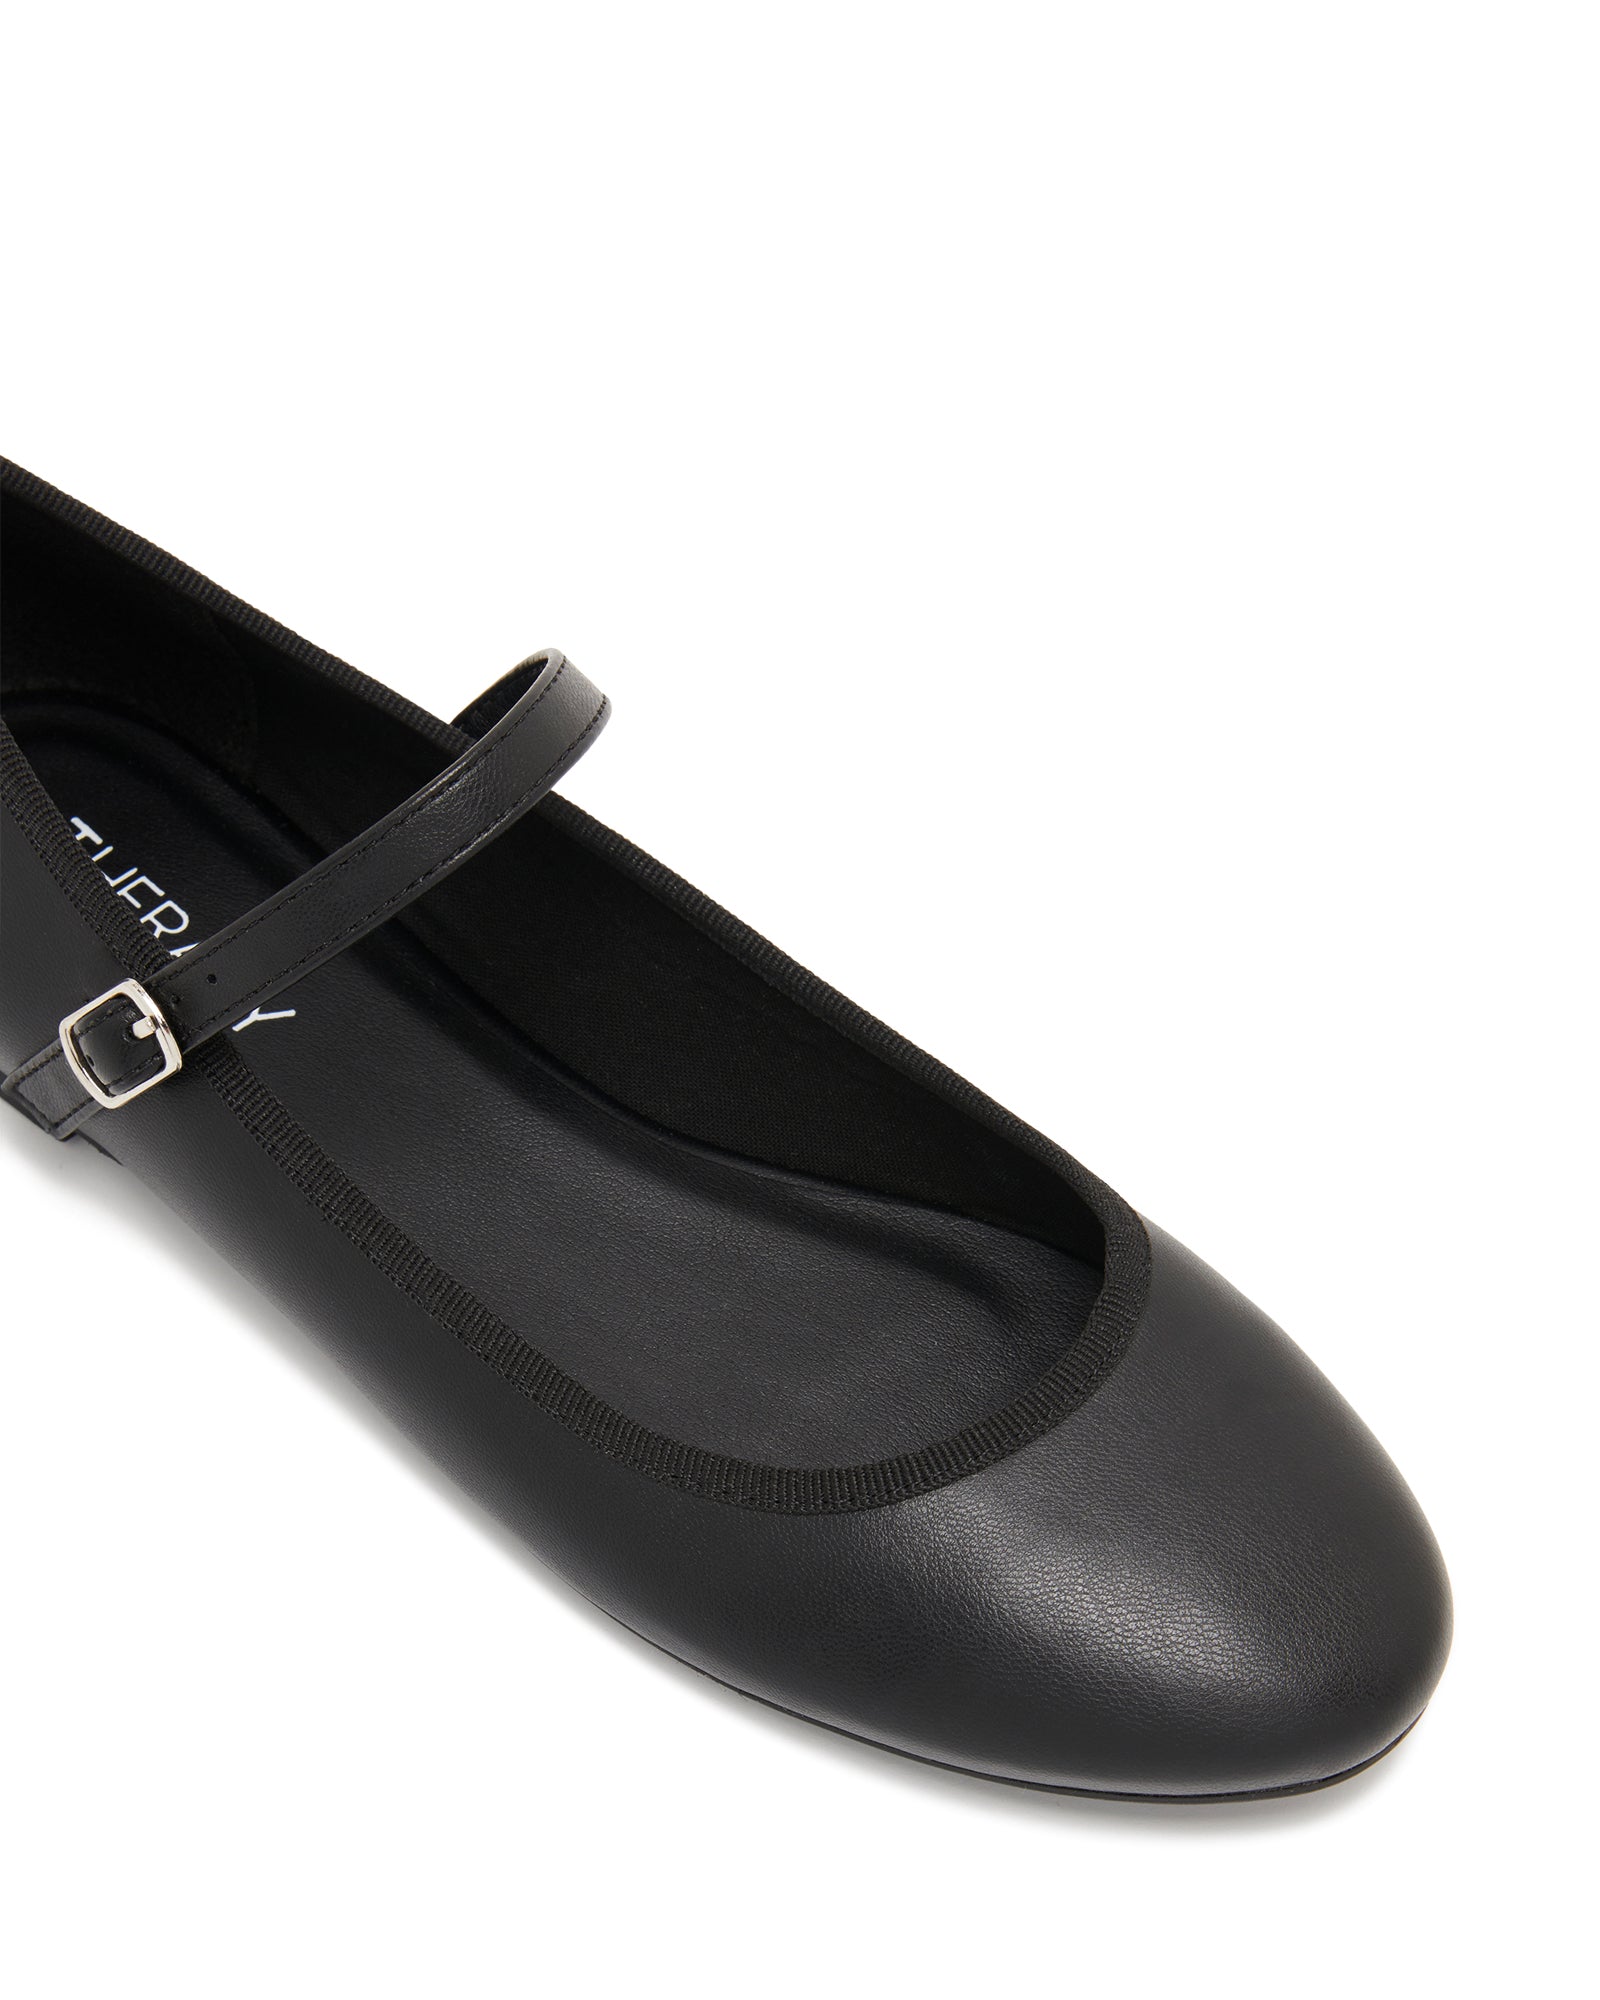 Therapy Shoes Jayne Black Smooth | Women's Flats | Ballet | Mary Jane